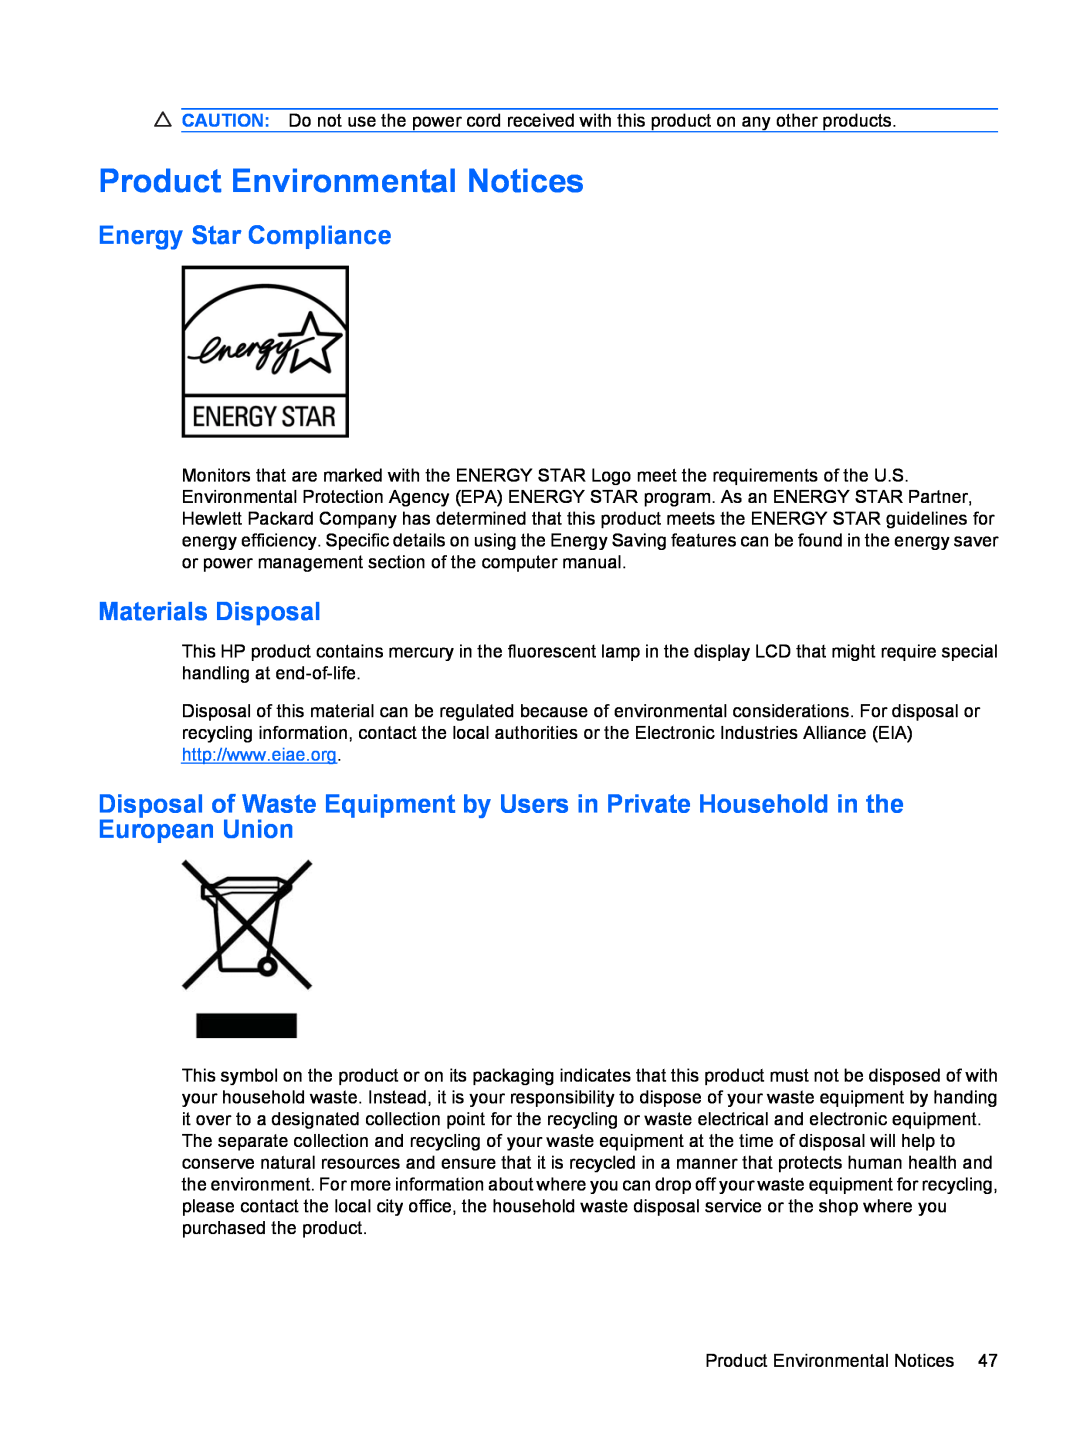 HP LP2275w manual Product Environmental Notices, Energy Star Compliance, Materials Disposal 